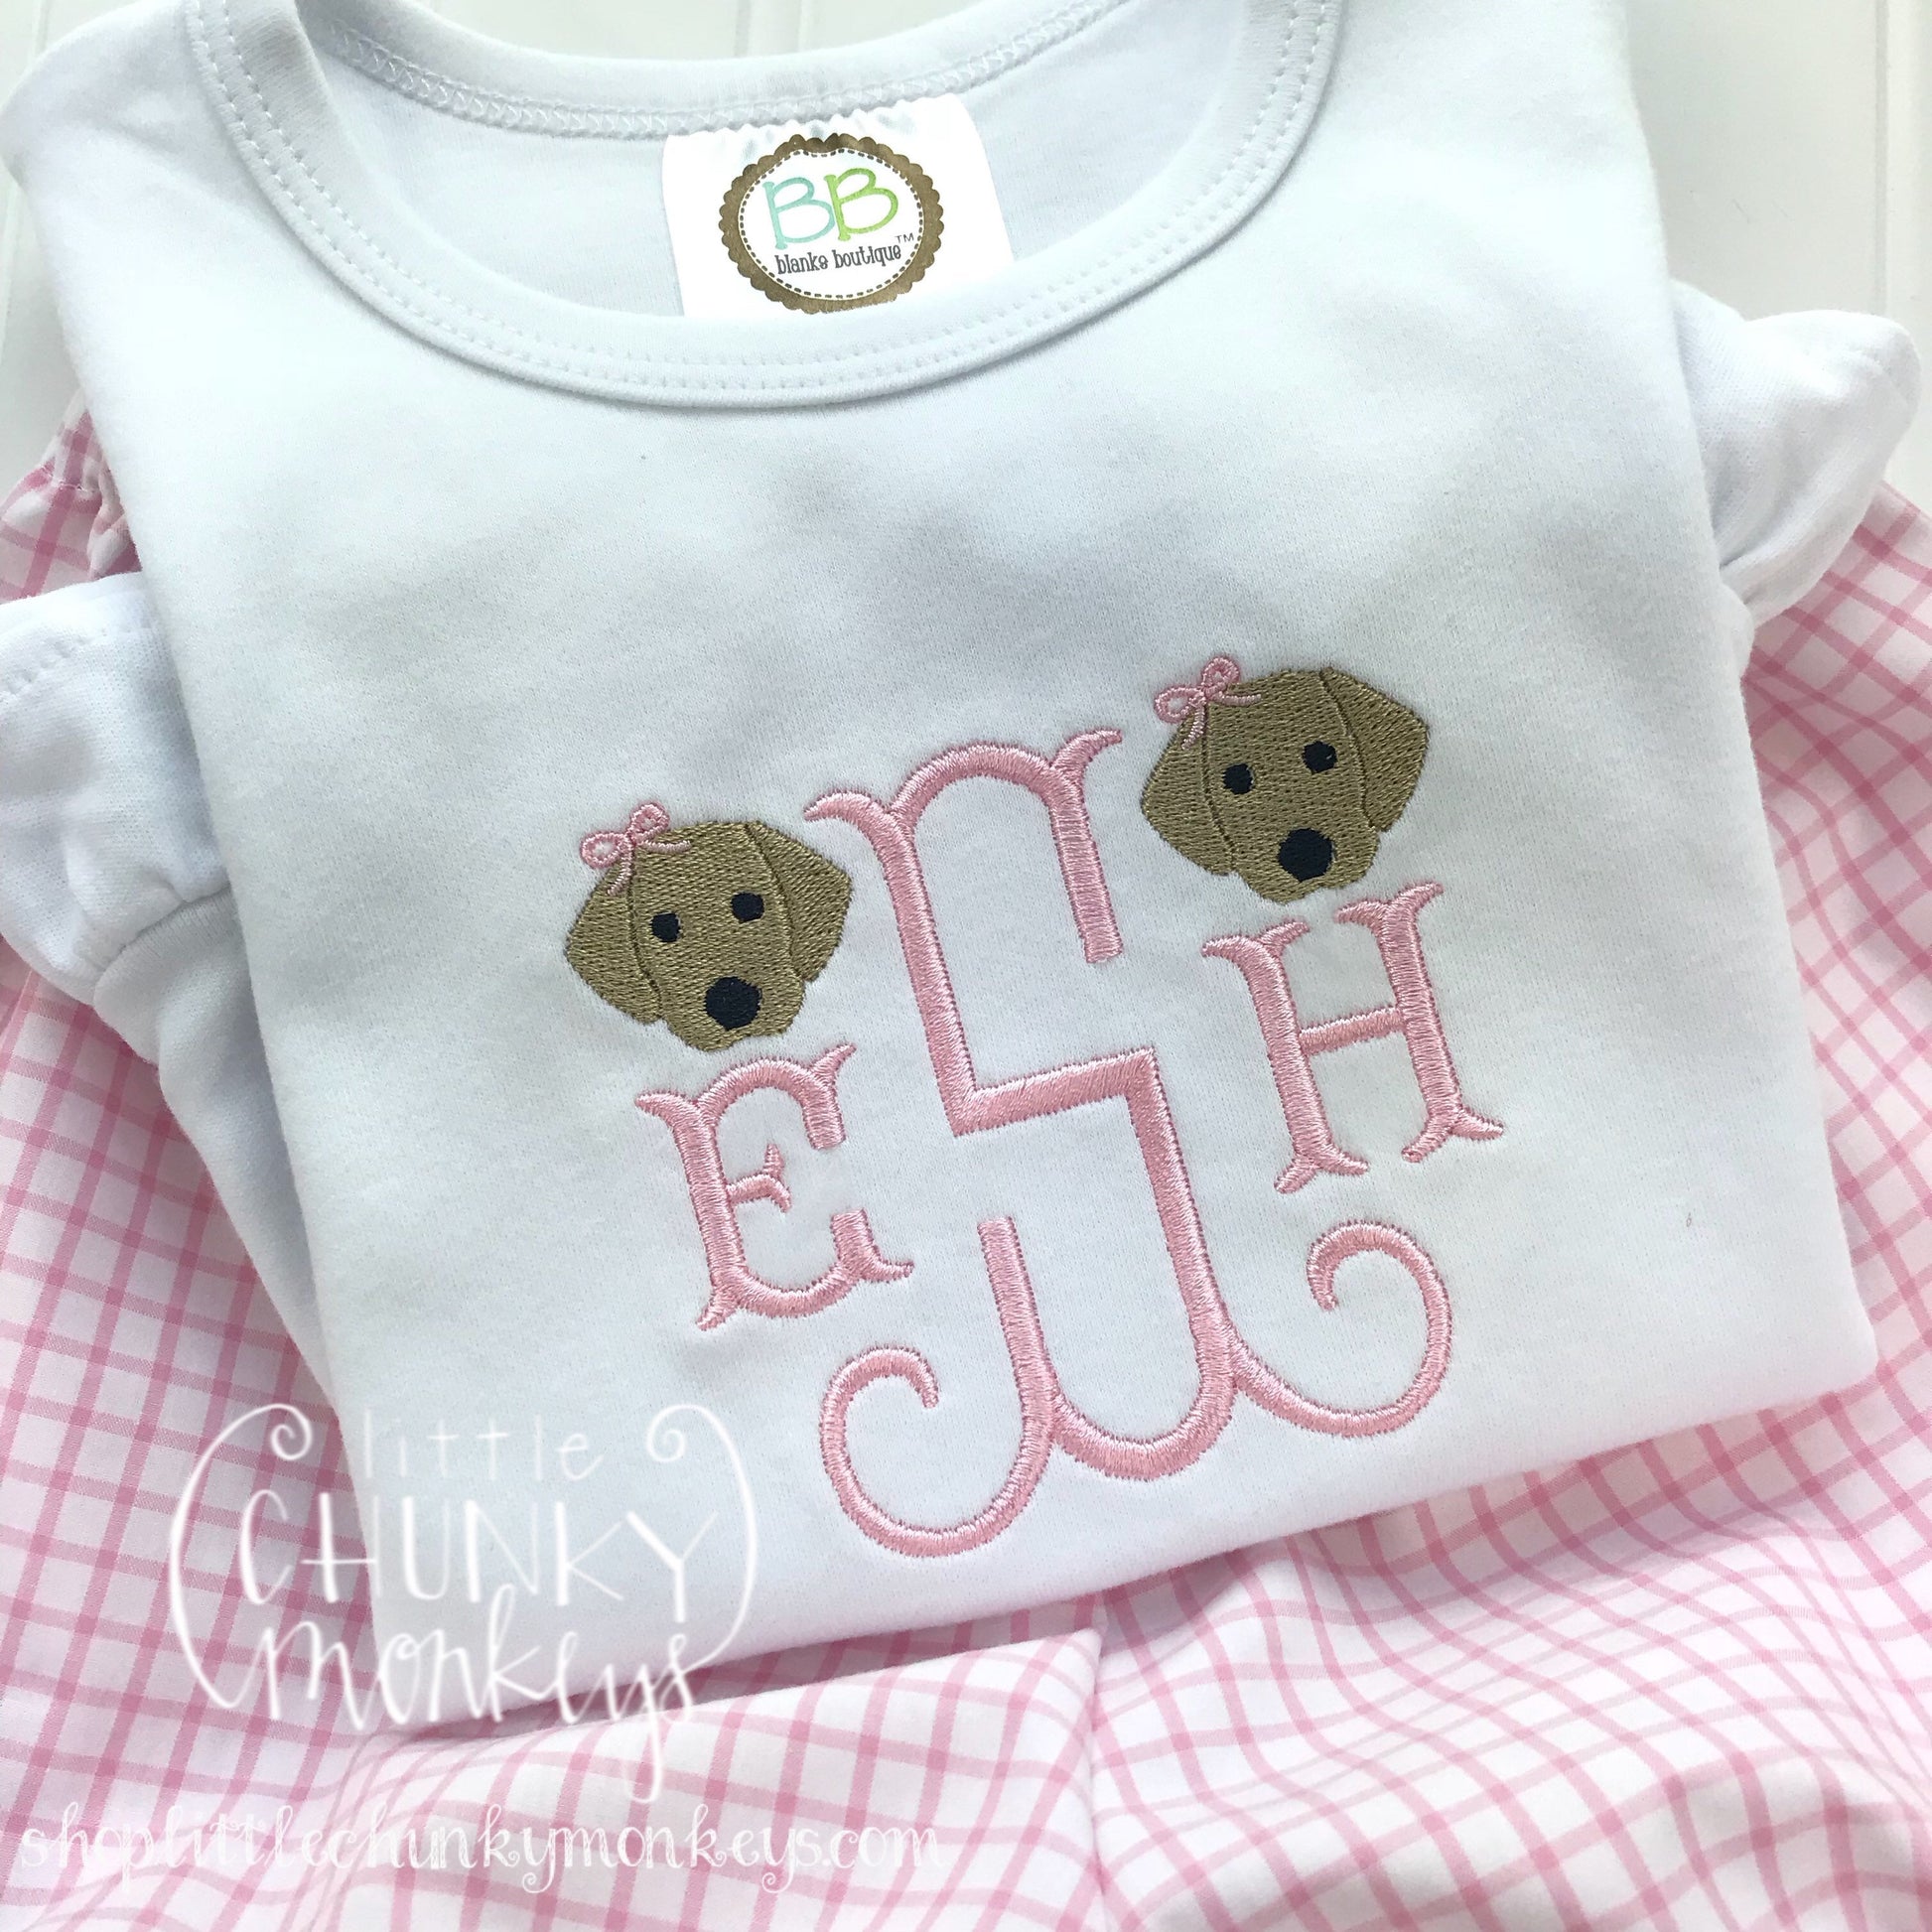 Girl outfit - Girl Shirt - Monogram Tee with Puppies and Bows